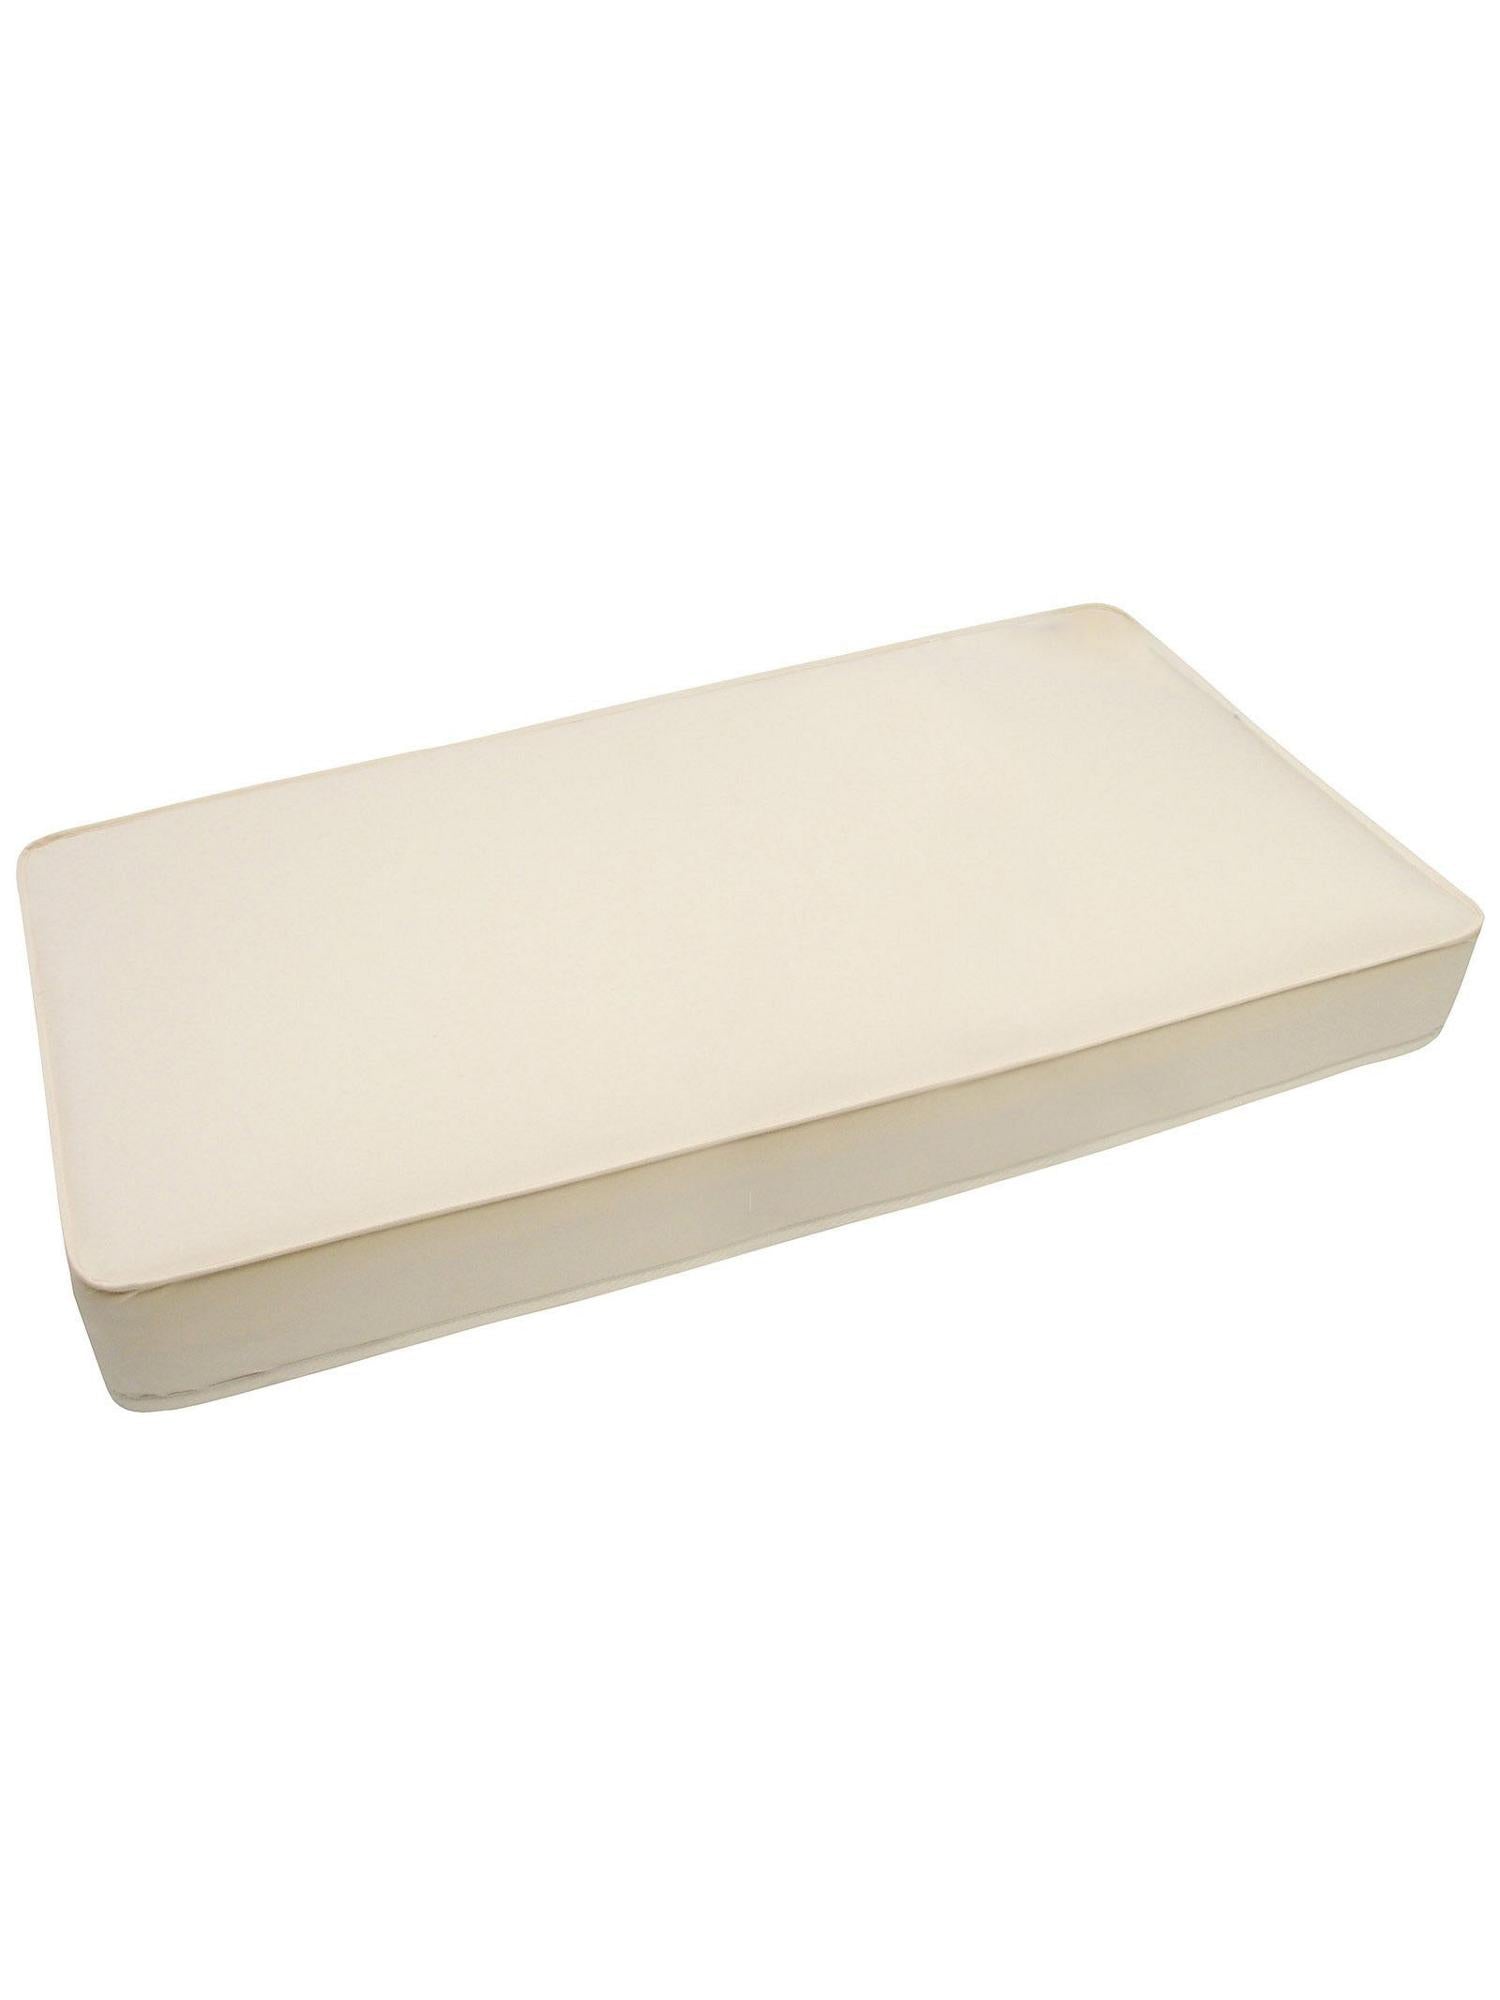 Cot Deluxe Mattress With Organic Cover